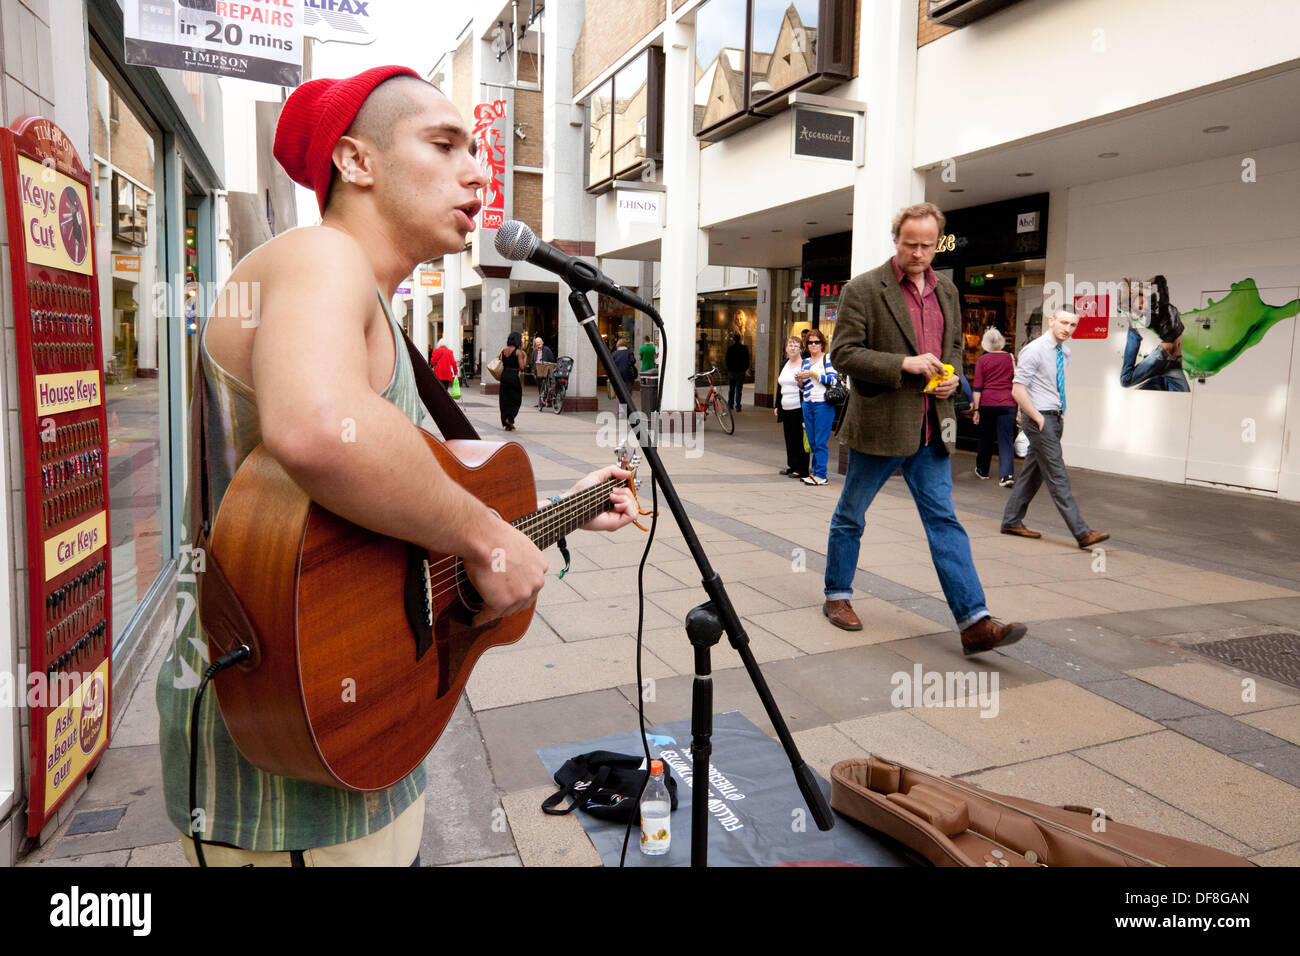 Street performer UK; Male busker playing guitar and singing, Lion Yard, Cambridge city centre UK Stock Photo